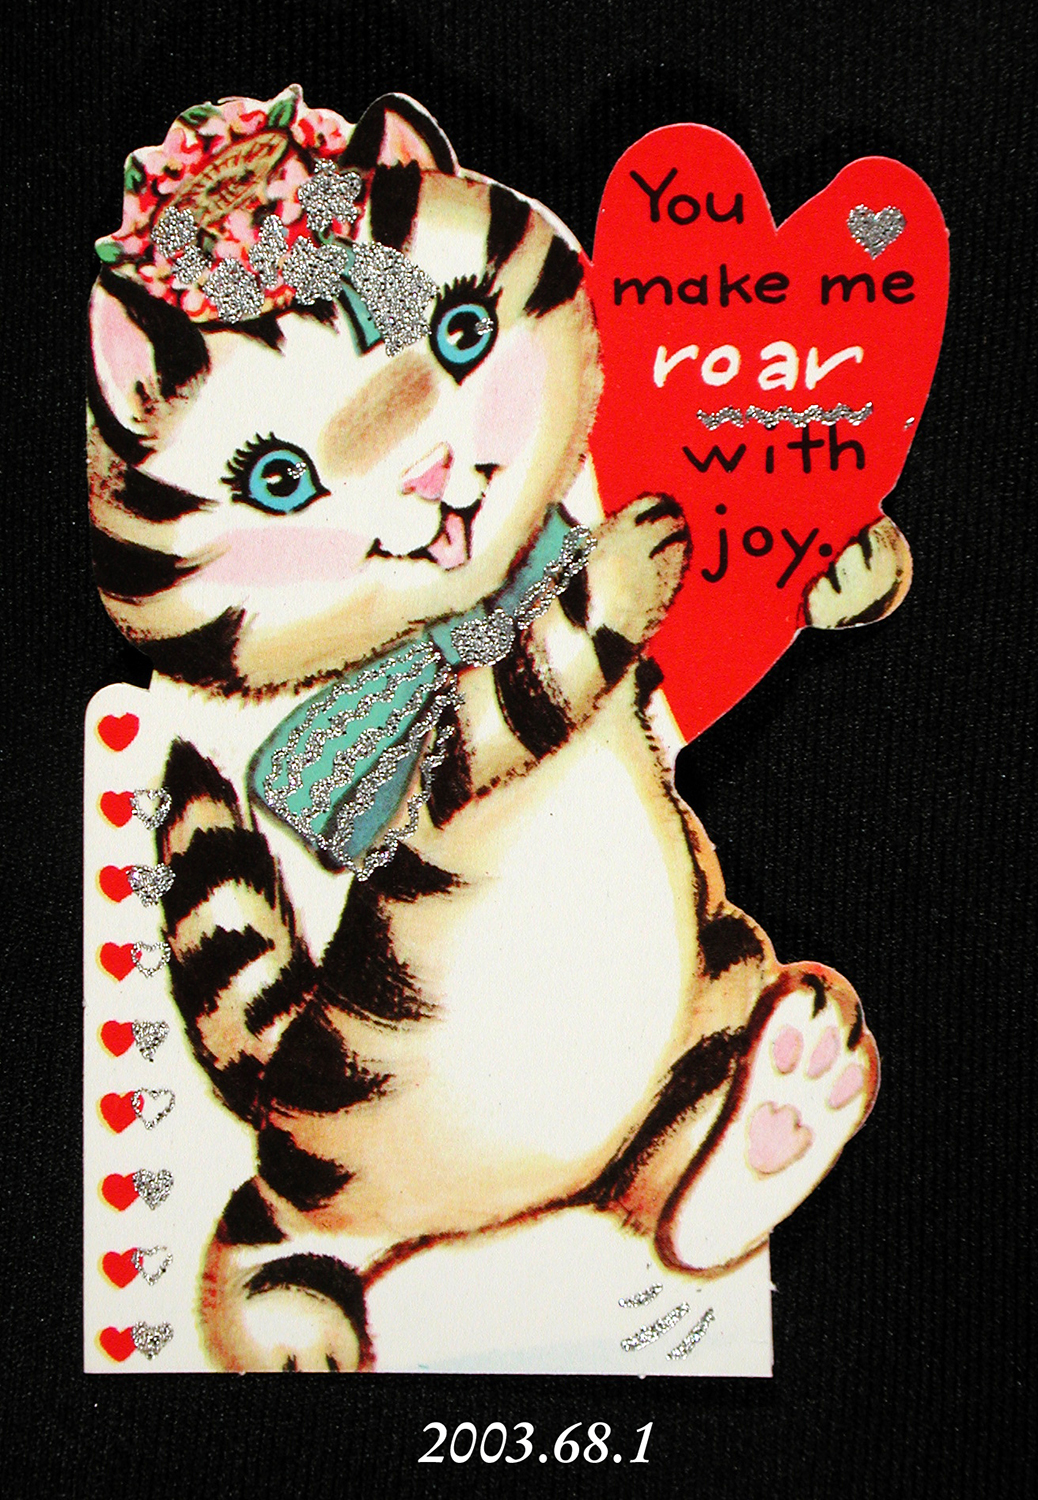 A glittery valentine card depicting a cat. It reads: "You make me roar with joy."